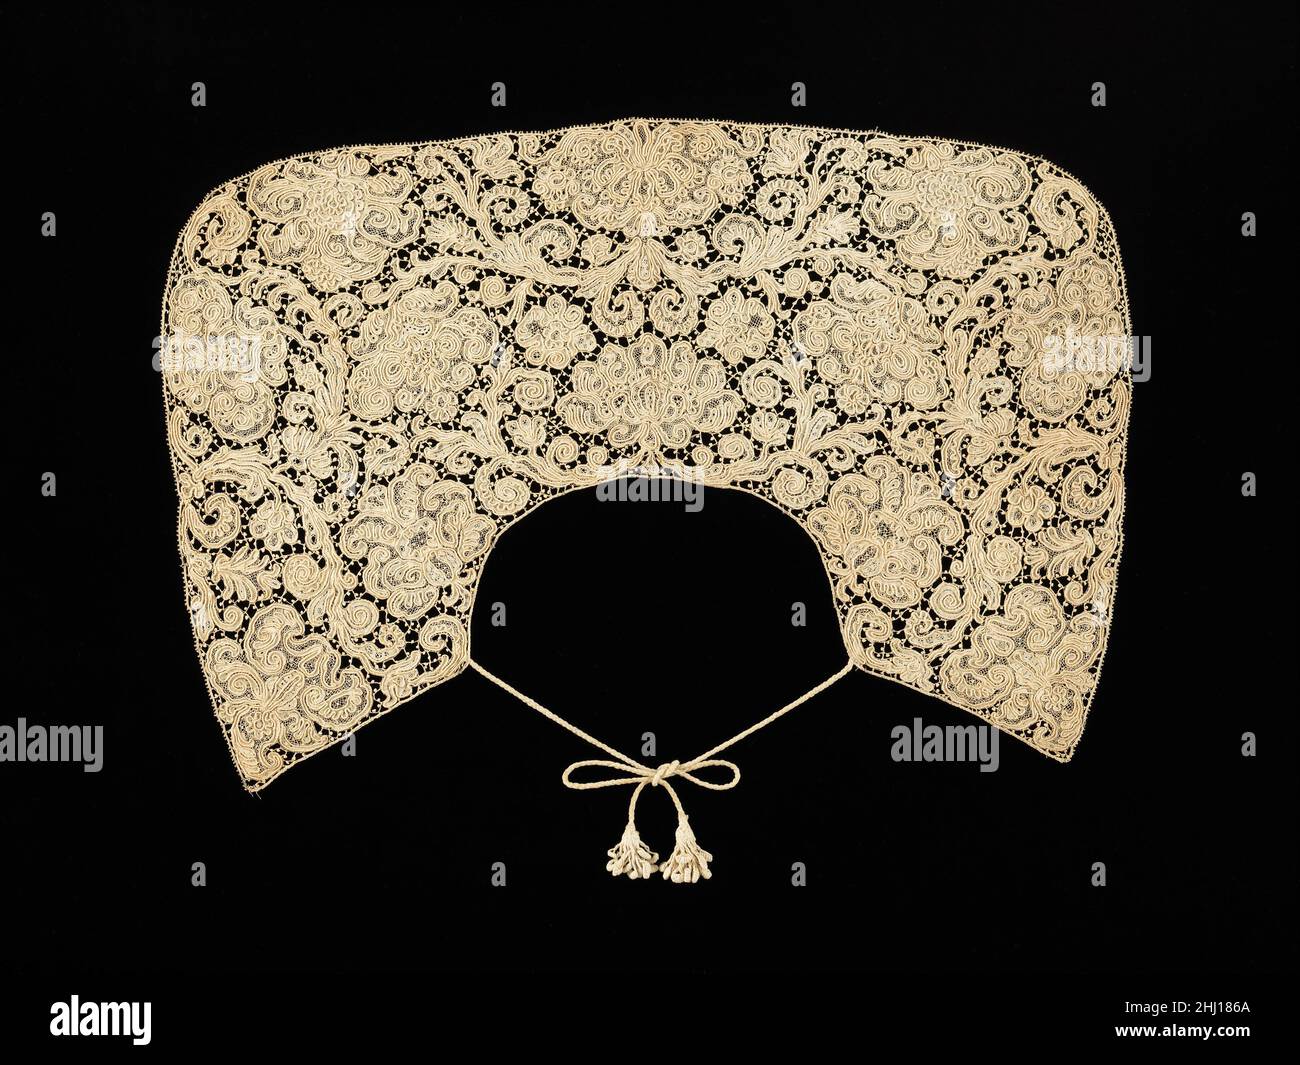 Collar late 17th century Spanish As it was customary to refashion fine laces, early lace pieces in their original form are fairly rare. That the lace pattern fills the whole space and conforms to the shape of the piece indicates this collar is in its original form. The ties are later replacements for the original ones.. Collar  156386 Stock Photo